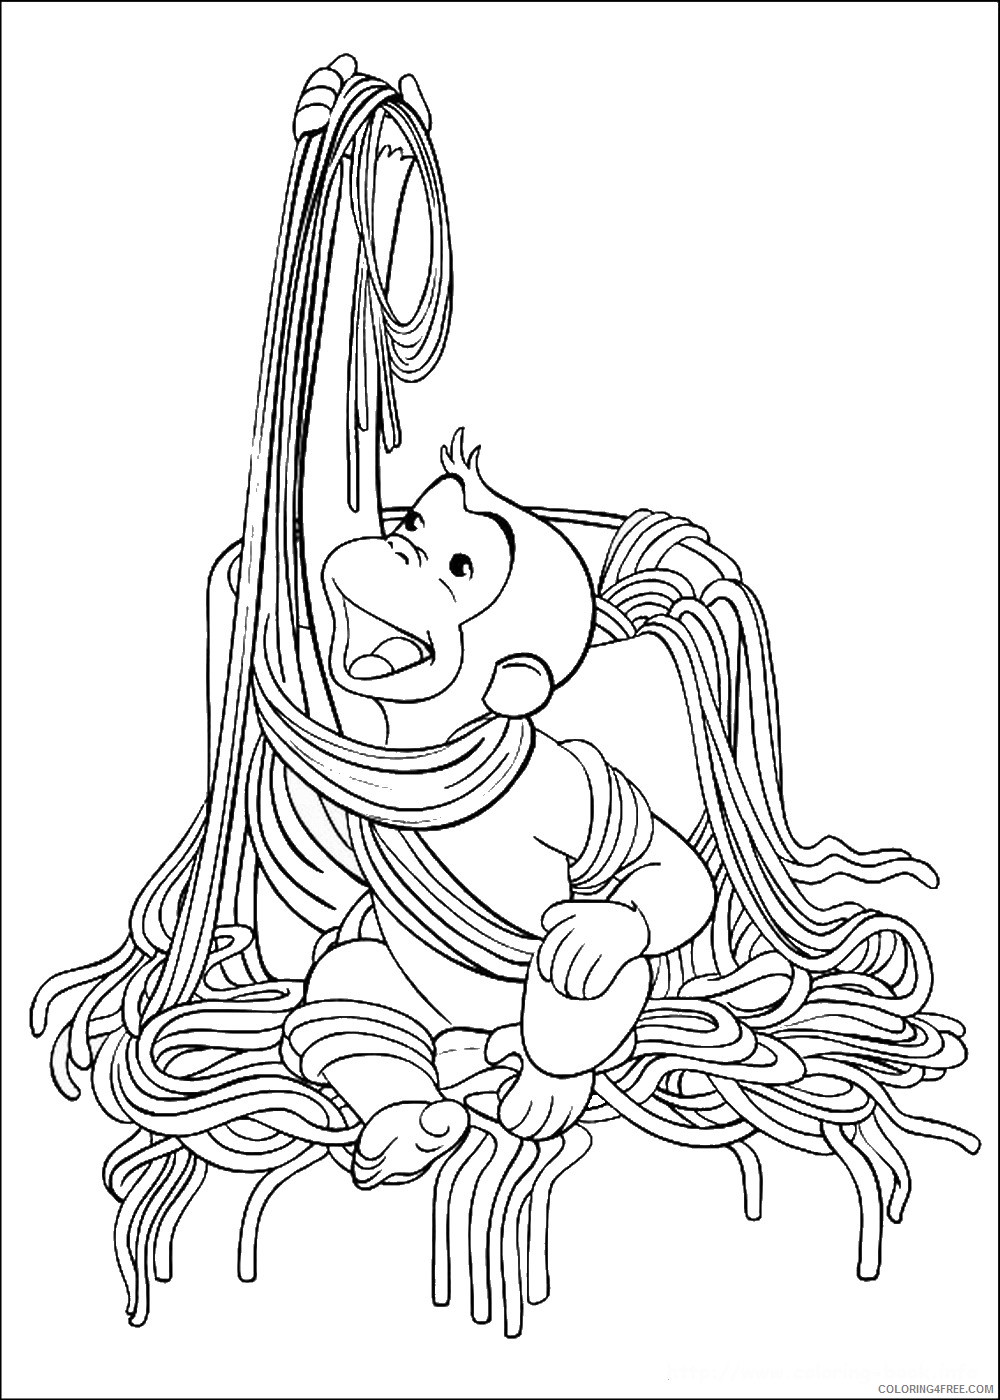 Curious George Coloring Pages Cartoons curious_george_cl32 Printable 2020 1898 Coloring4free